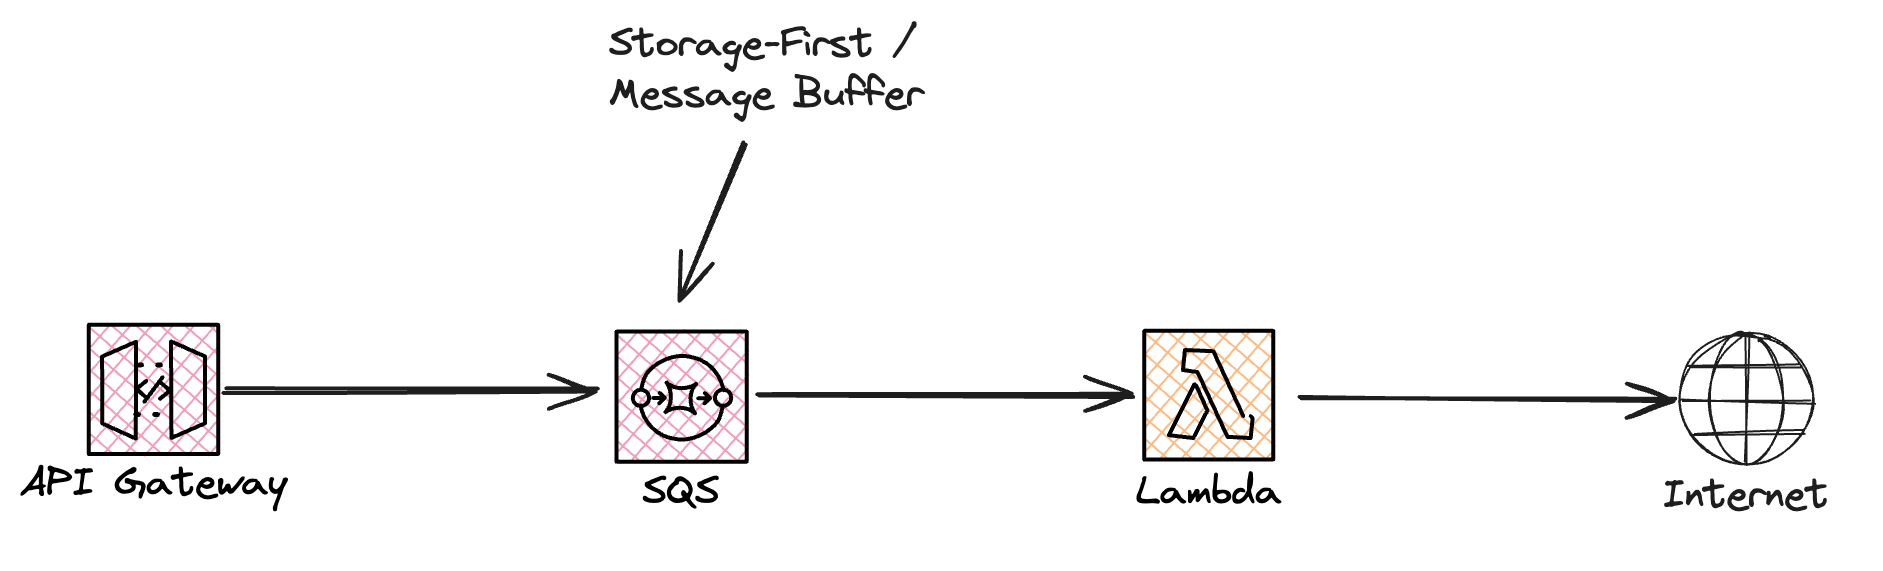 Image of storage-first architecture